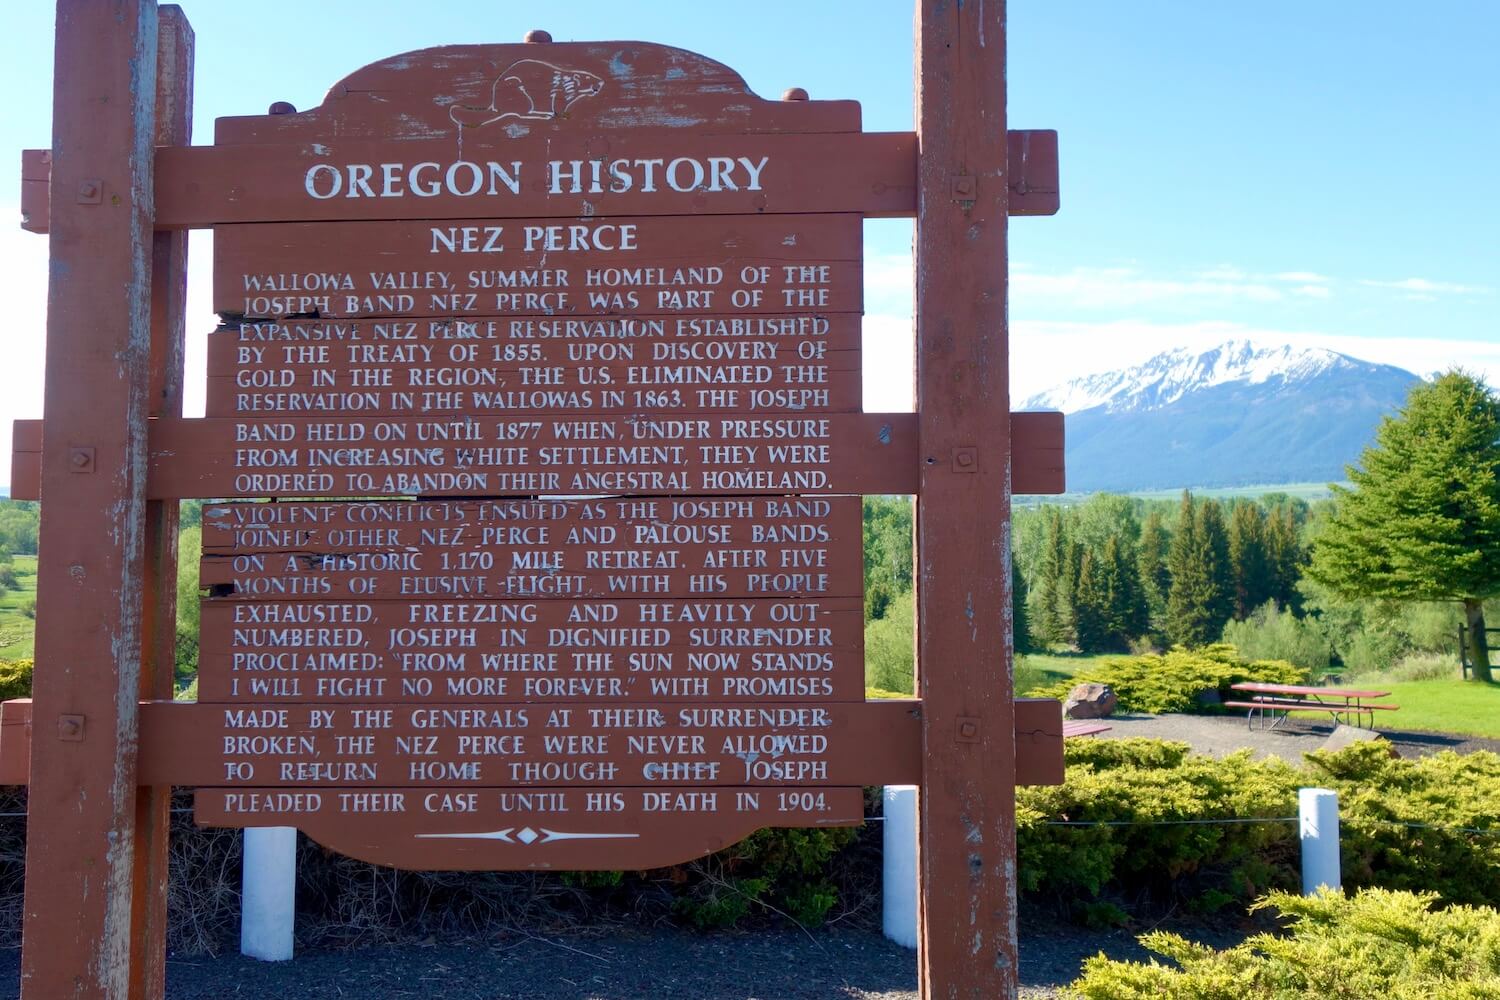 An Oregon History side on the side of the road is worn red painted wood with white letters that briefly describes the Nez Perce people who used to live in this region that is present day Joseph Oregon.  